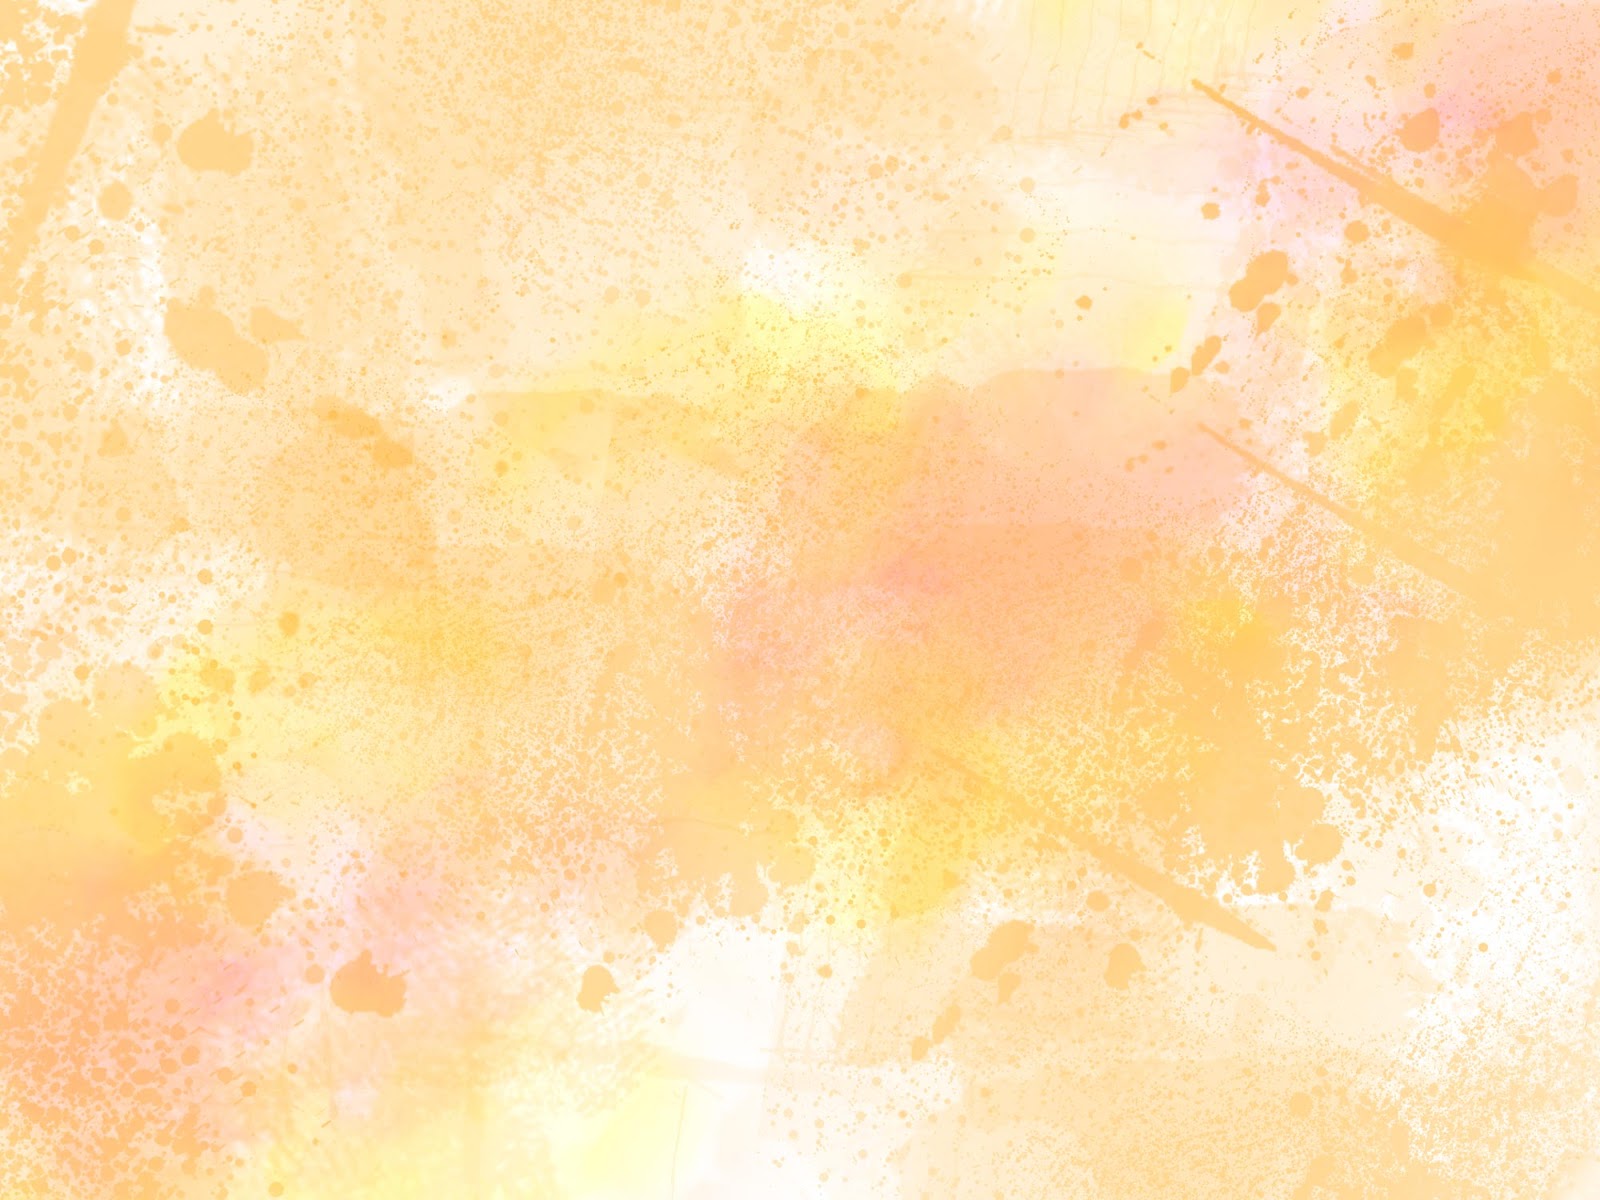 Free Download Pastel Orange Grunge Background With Yellow And Pink Highlights 1600x1200 For Your Desktop Mobile Tablet Explore 75 Backgrounds Yellow Yellow Wallpaper Short Story The Yellow Wallpaper Summary Aesthetic pastel yellow wallpapers wallpaper cave. pastel orange grunge background